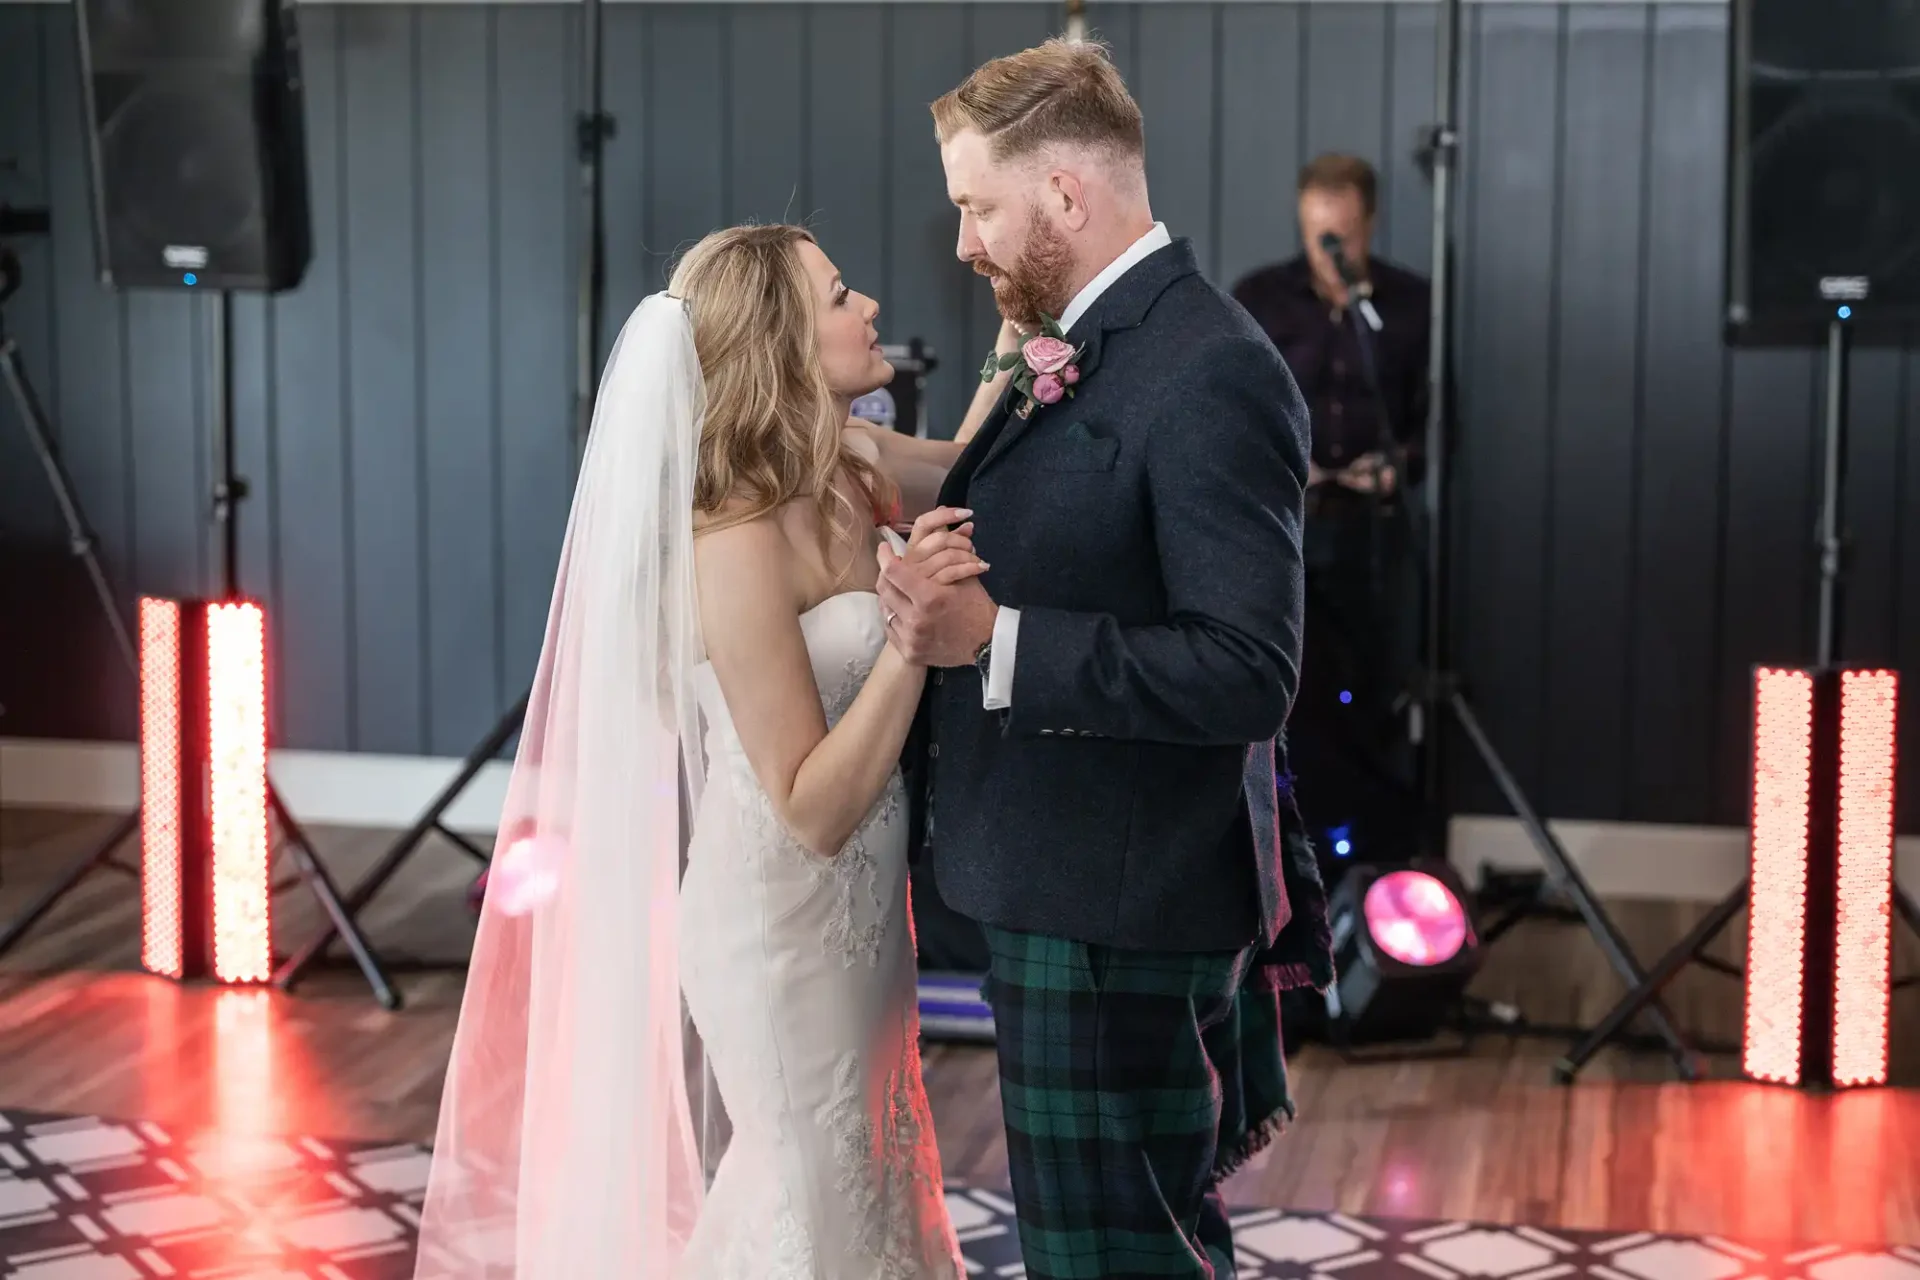 A newlywed couple dances closely at their wedding reception, with the bride in a white gown and the groom in a kilt, against a backdrop of colorful lights and a live band.